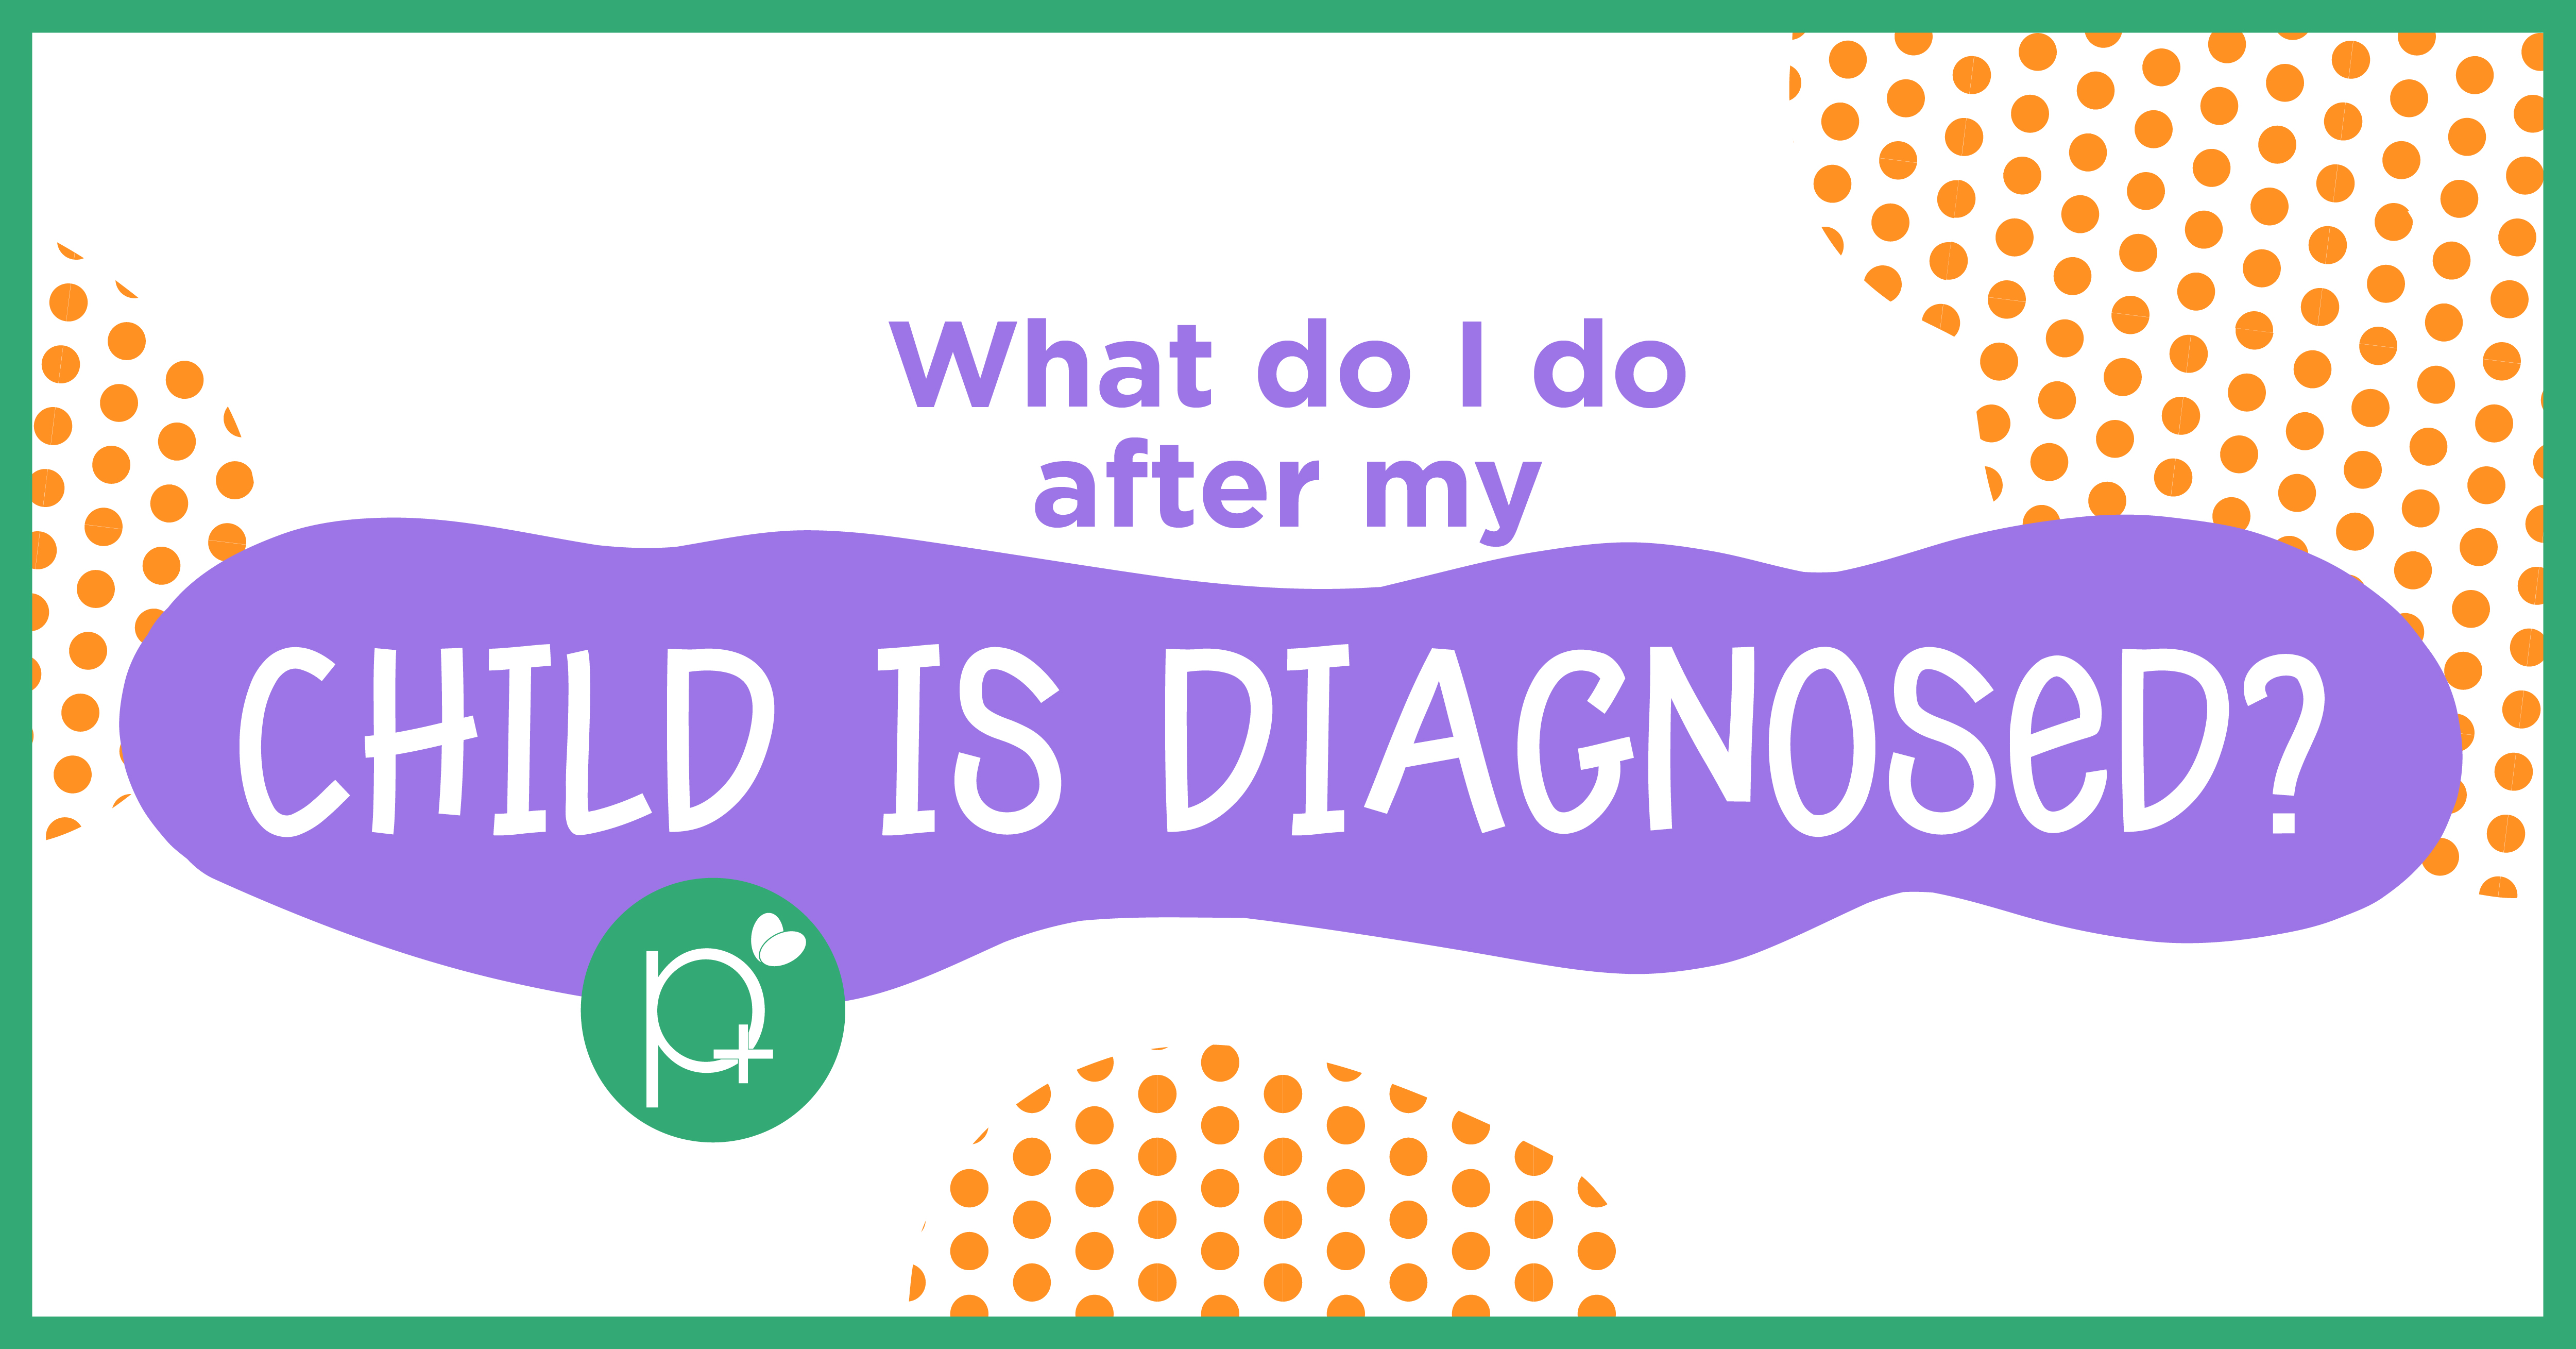 What do I do after my child is diagnosed?